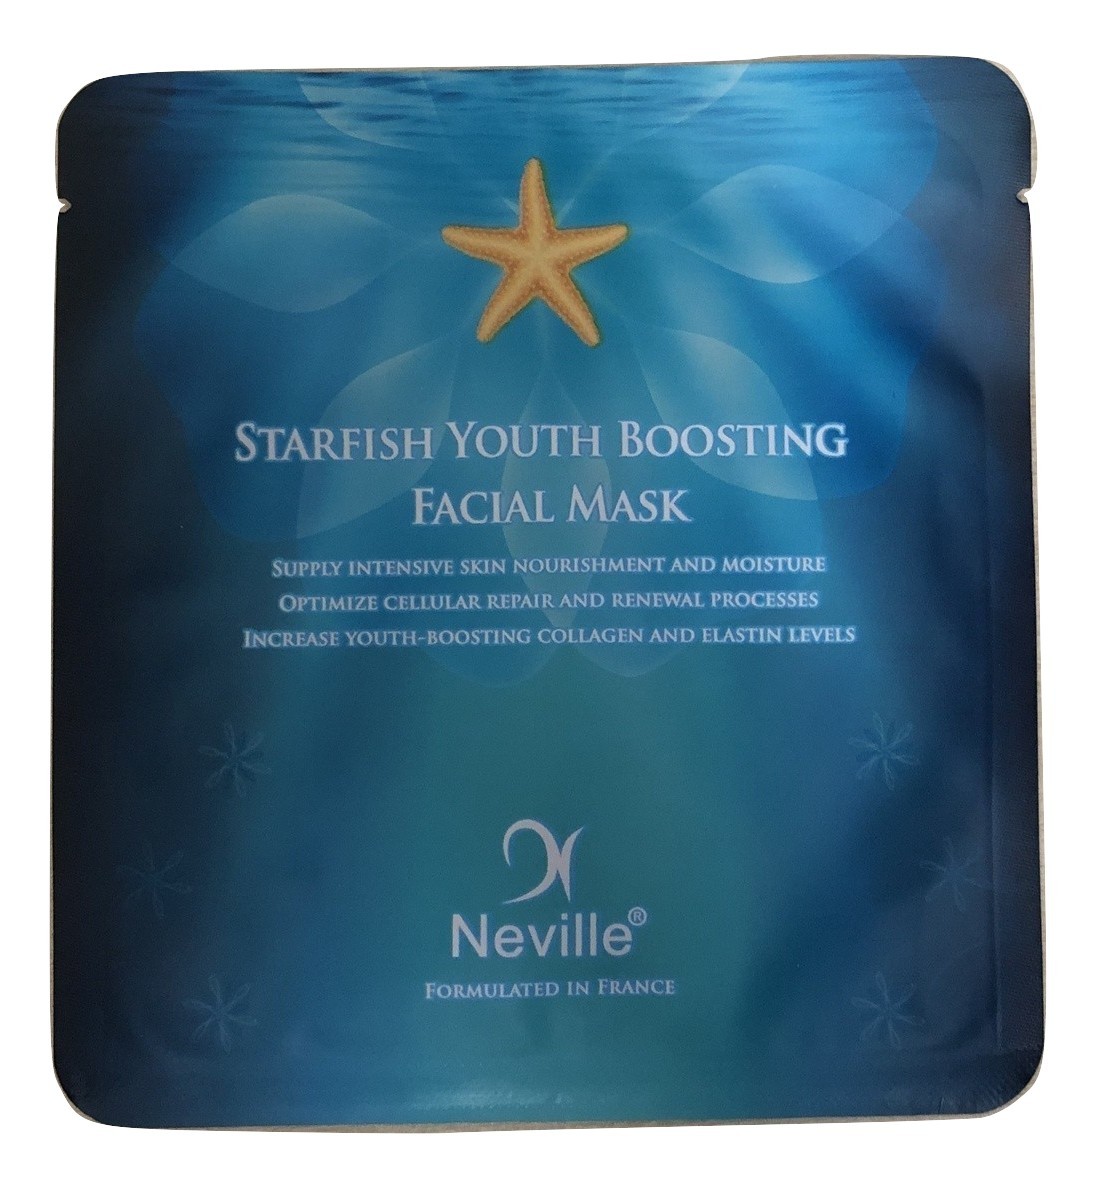 Neville Starfish Youth Boosting Facial Mask (5 pcs)